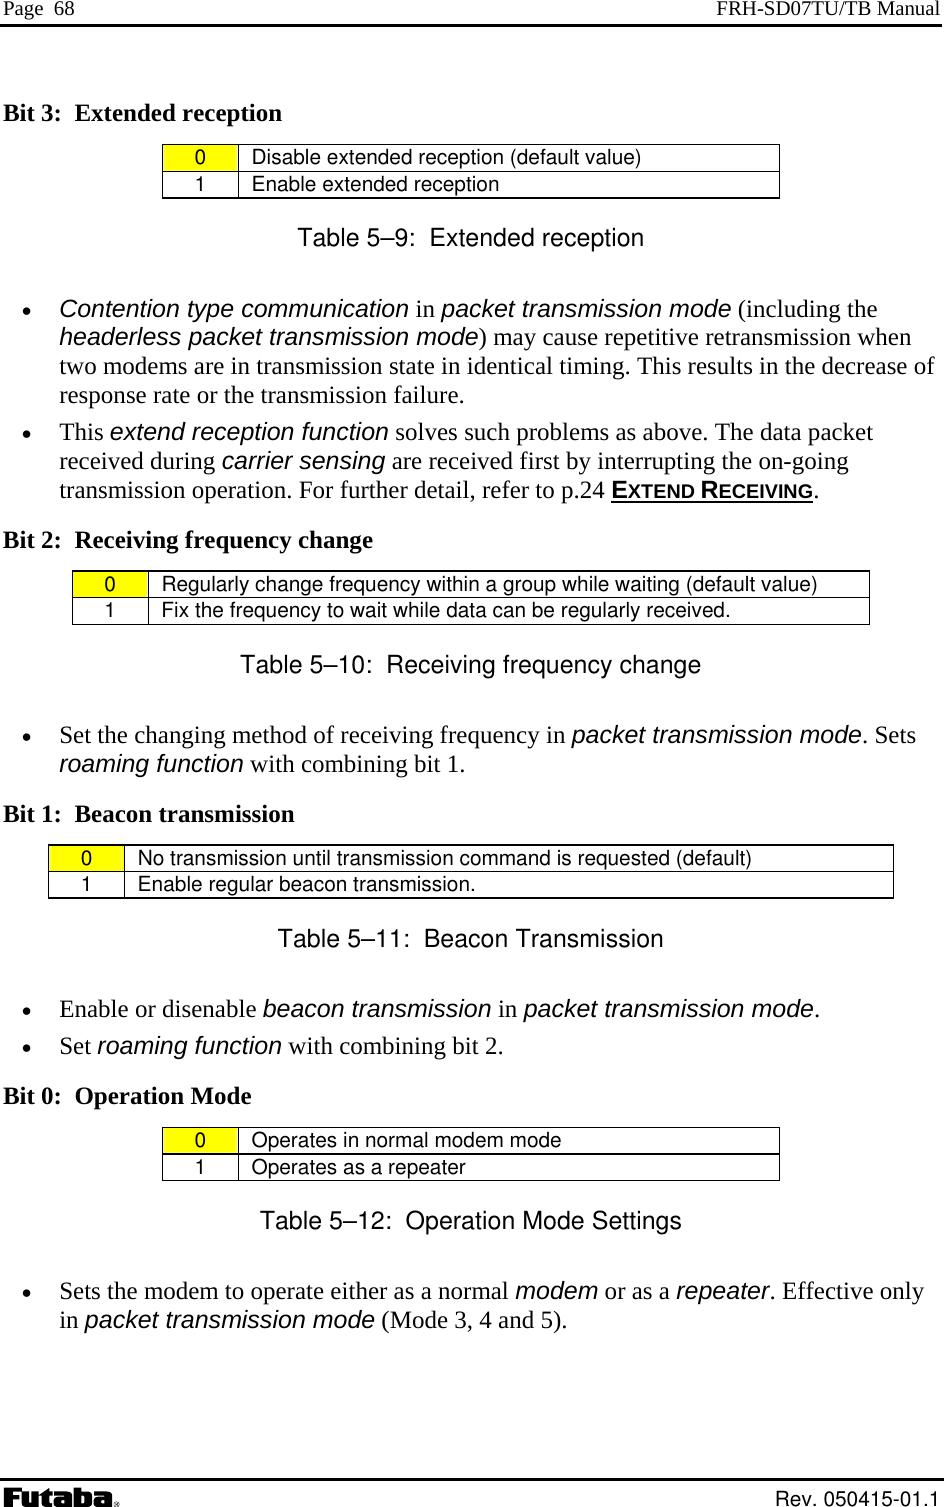 Page  68  FRH-SD07TU/TB Manual Bit 3:  Extended reception 0   Disable extended reception (default value) 1   Enable extended reception  Table 5–9:  Extended reception •  Contention type communication in packet transmission mode (including the headerless packet trans ission when two modems  i his results in the decrease of response rate  th•  This extend recep  The data packet received during carrier sensing are received first by interrupting the on-going tail, refer to p.24 EXTEND RECEIVINGmission mode) may cause repetitive retransm transmission state in identical timing. T are n or e transmission failure. tion function solves such problems as above.transmission operation. For further de . B 2it  :  Receiving frequency change 0   Regularly change frequency within a group while waiting (default value) 1   Fix the frequency to wait while data can be regularly received. Table 5–10:  Receiving frequency change  •  Set the ch in sion mode. Sets roaming f ctBit 1:  Beacon transmang g method of receiving frequency in packet transmisun ion with combining bit 1. ission 0   No transmission until transmission command is requested (default) 1   Enable regular beacon transmission. Table 5–11:  Beacon Transmission •  Enable or disenable be n mode. •  Set roaming functionBit 0:  Operation Mode acon transmission in packet transmissio with combining bit 2. 0   Operates in normal modem mode 1   Operates as a repeater Table 5–12:  Operation Mode Settings  Sets the modem to operate either as a normal modem or as a re•  peater. Effective only in packet transmission mode (Mode 3, 4 and 5).  Rev. 050415-01.1 